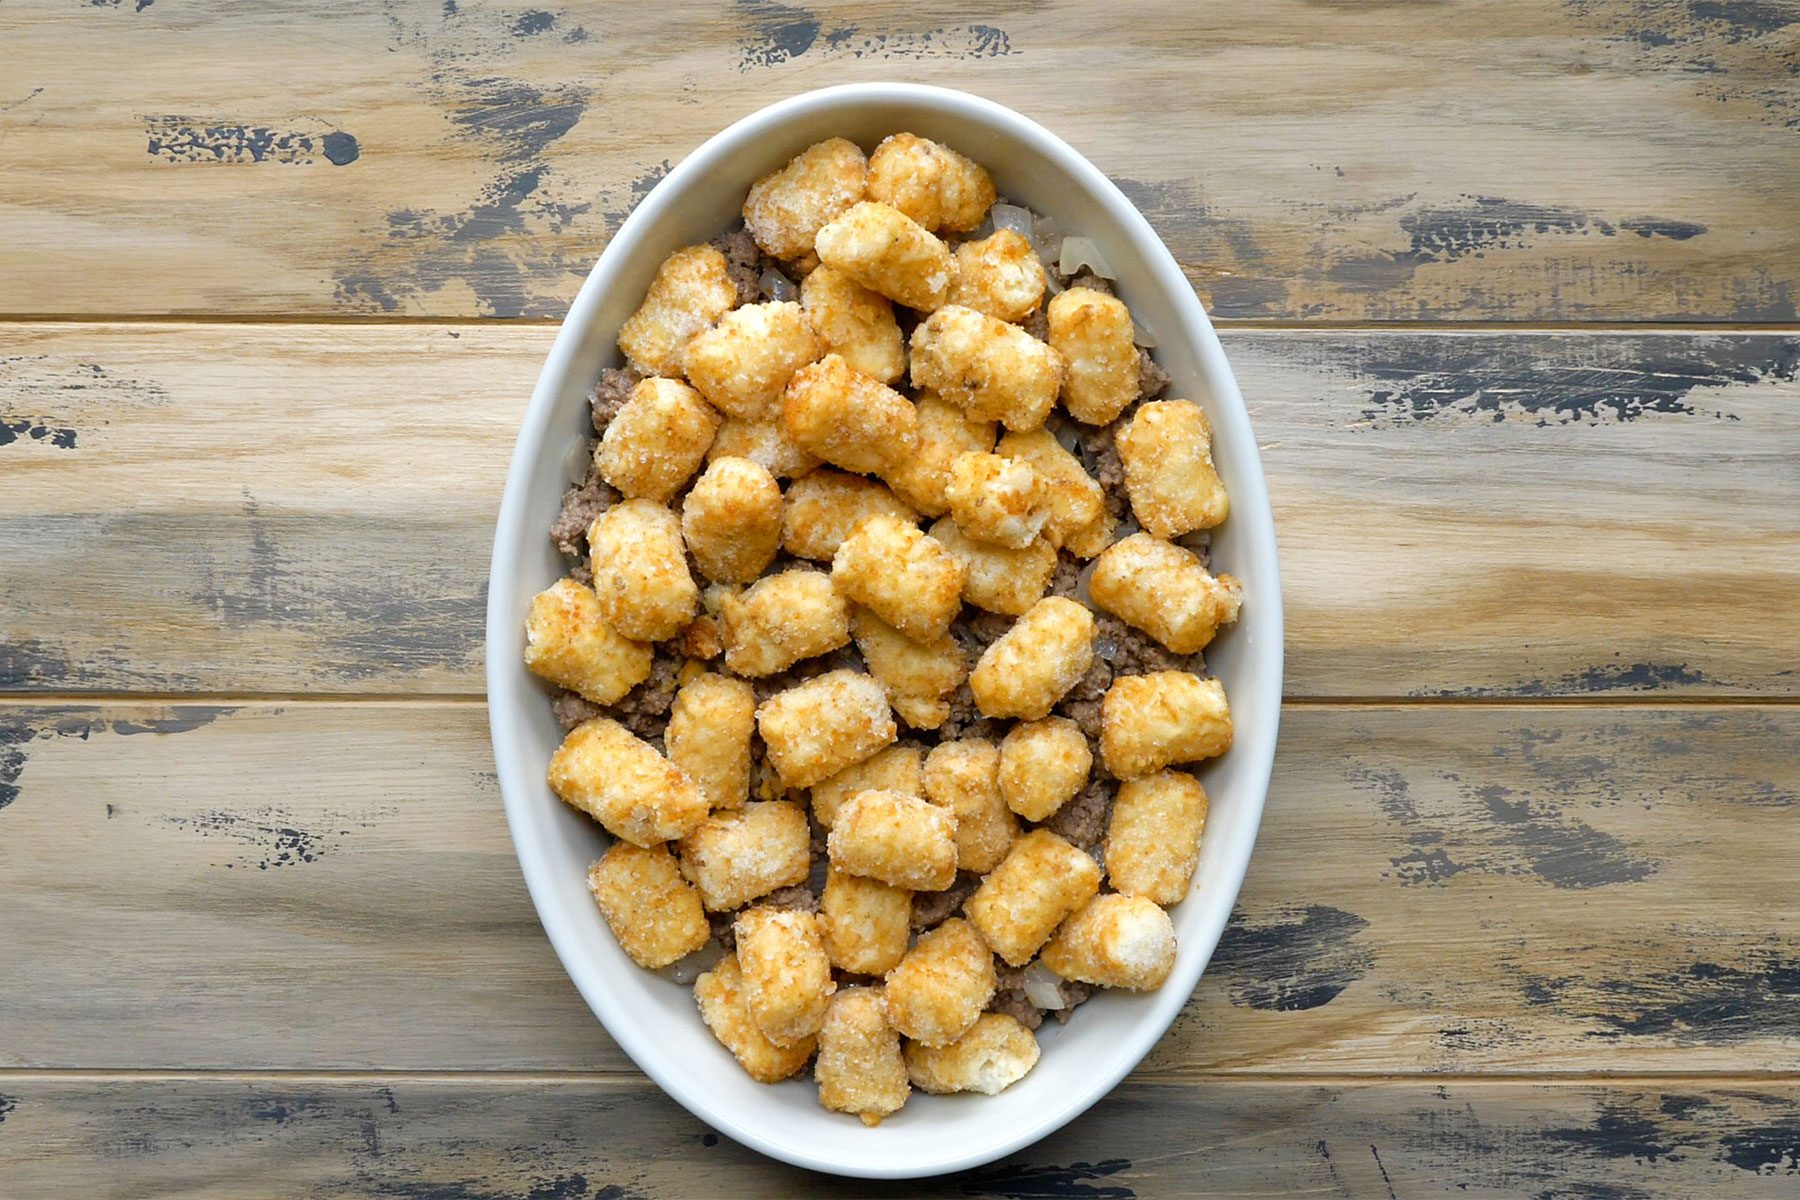 Overhead shot of transfered to a greased baking dish; top with tater tots; wooden background;